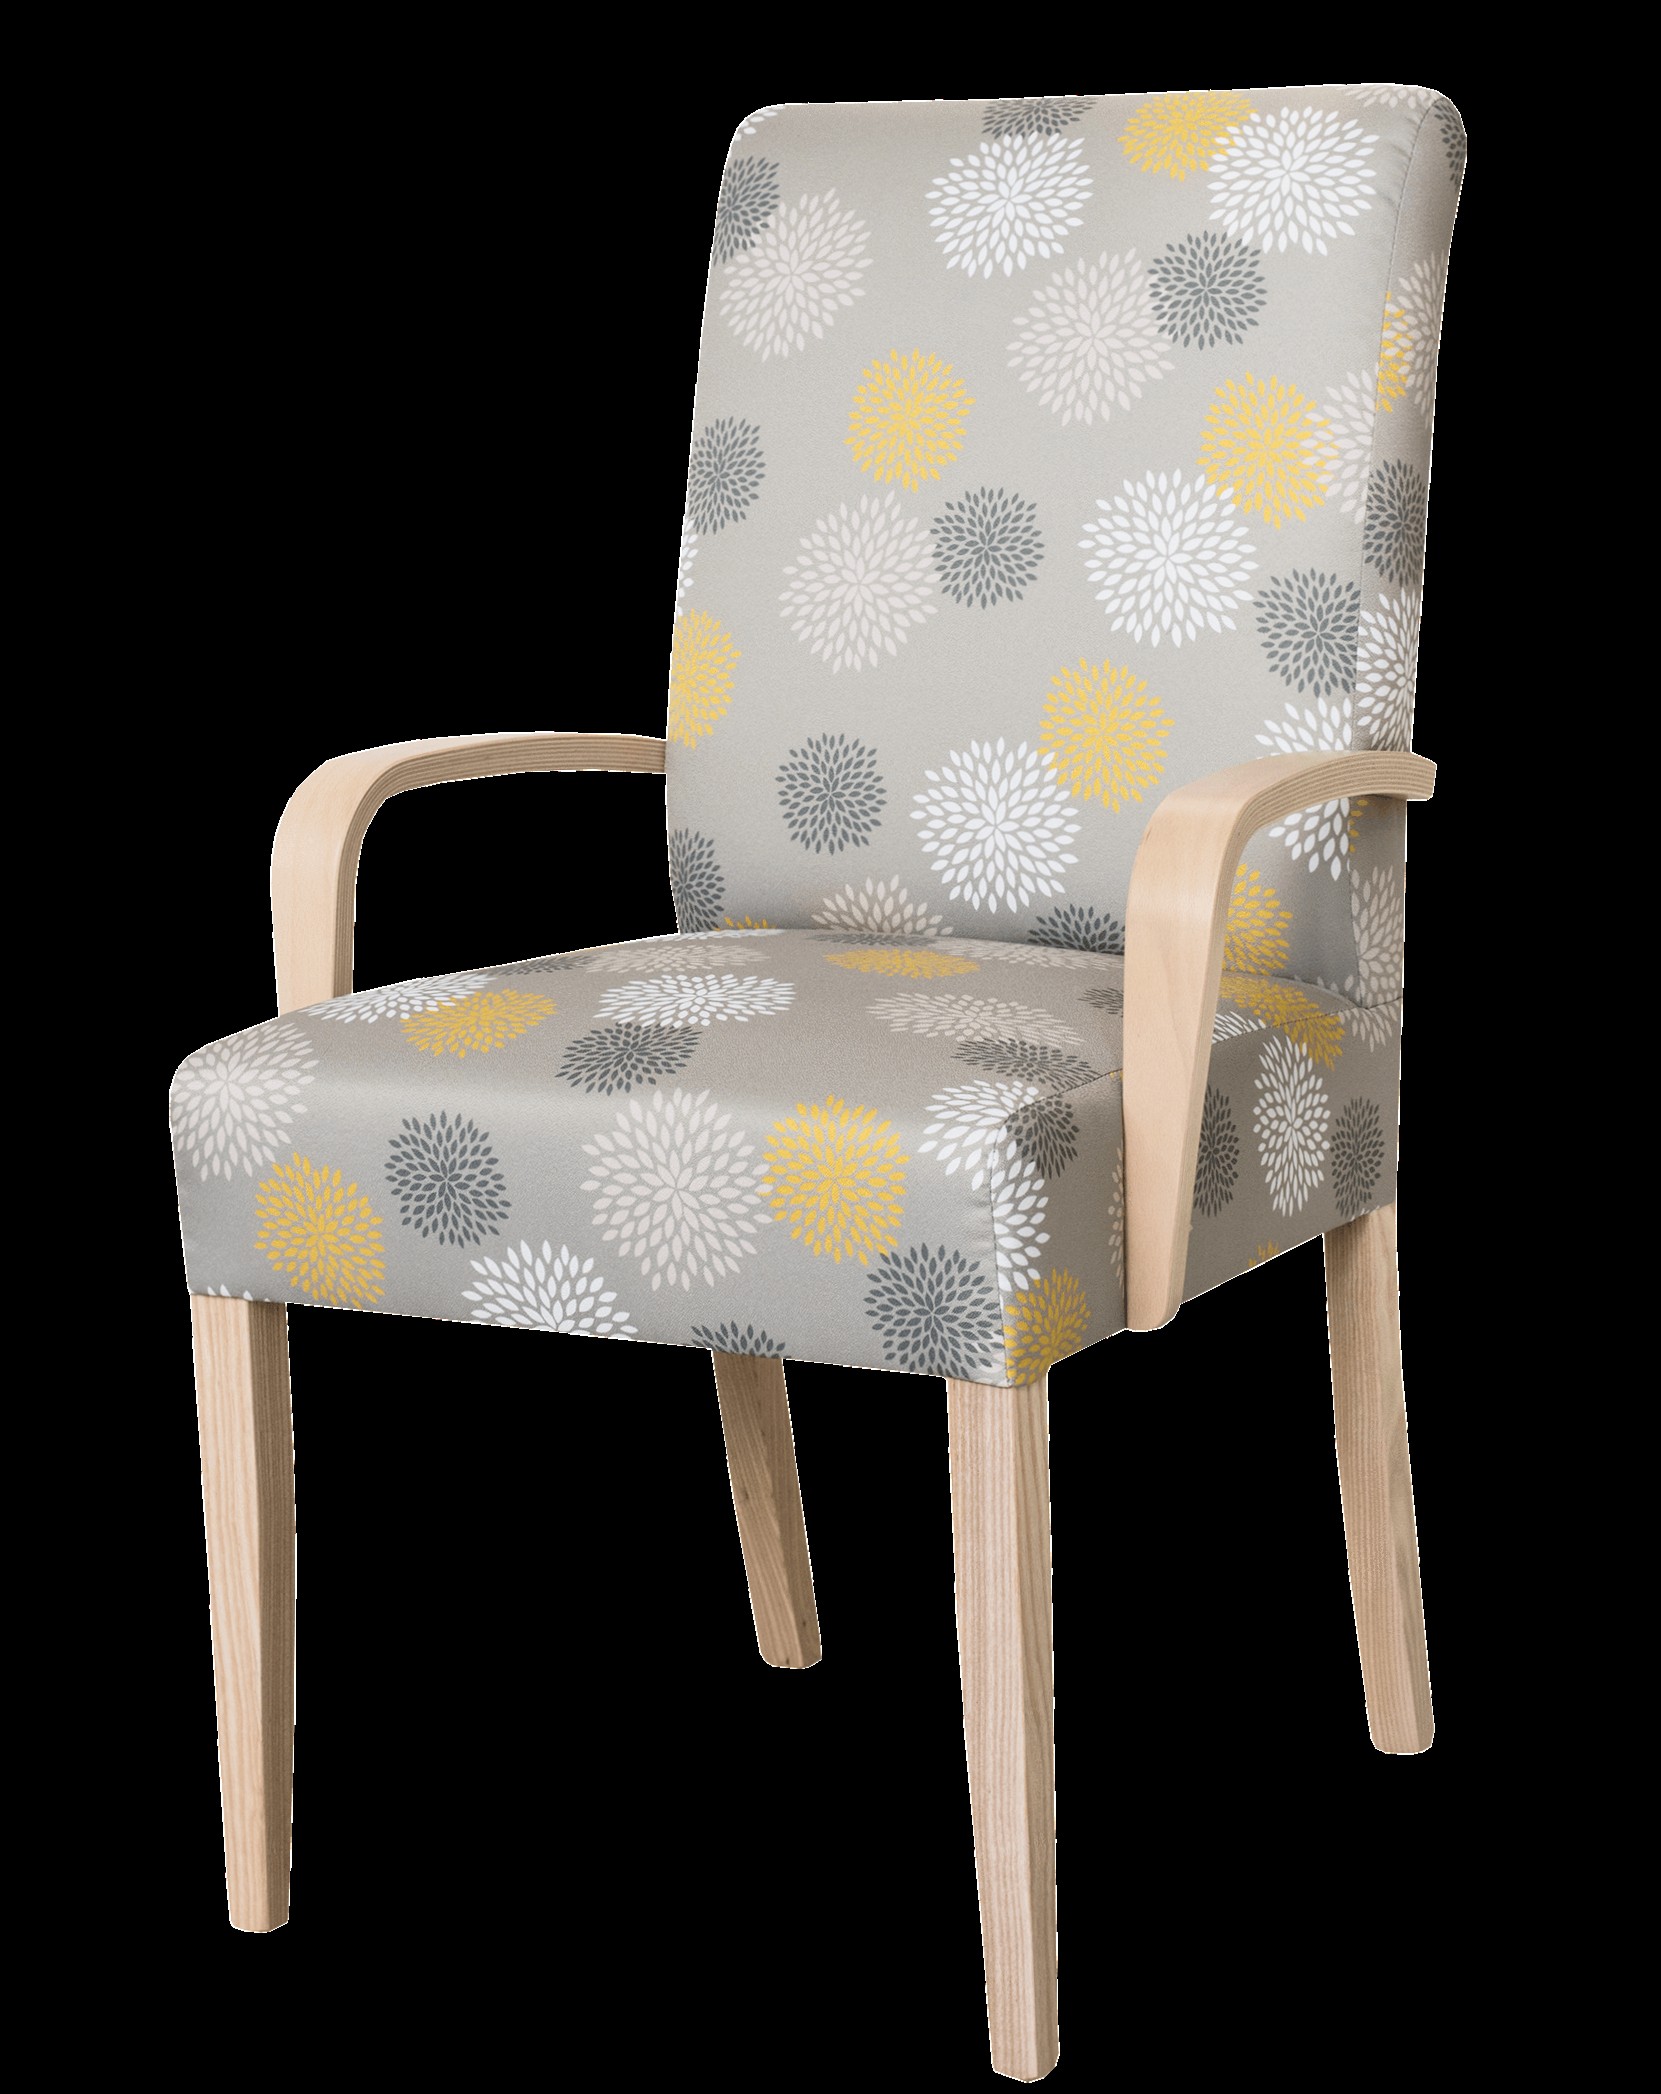 Camden arm chair specialised quality fit for purpose